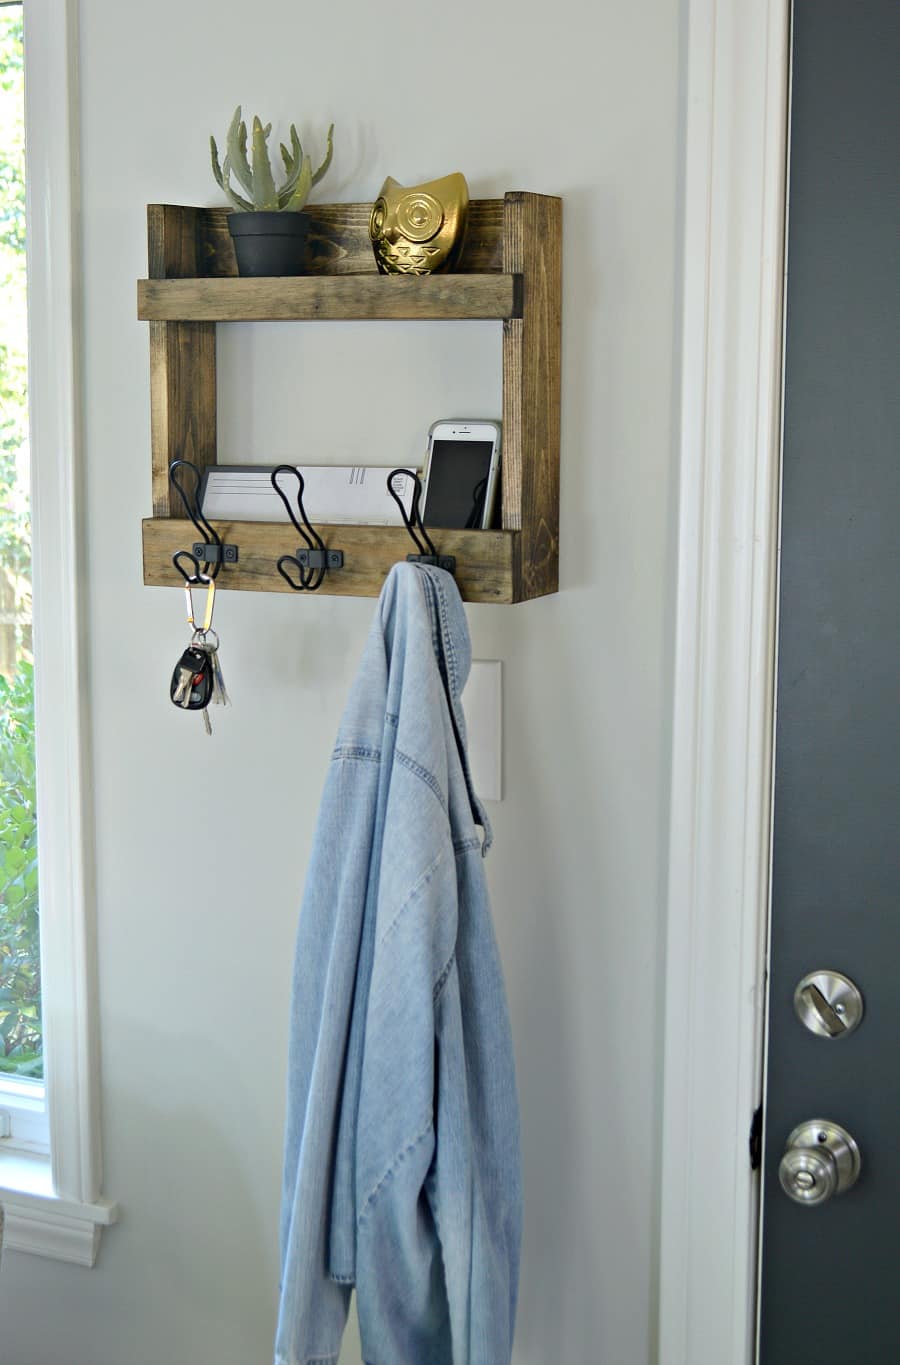 Rustic Wall Mounted Coat Rack with Shelves - Perfect for Small Space Solutions!